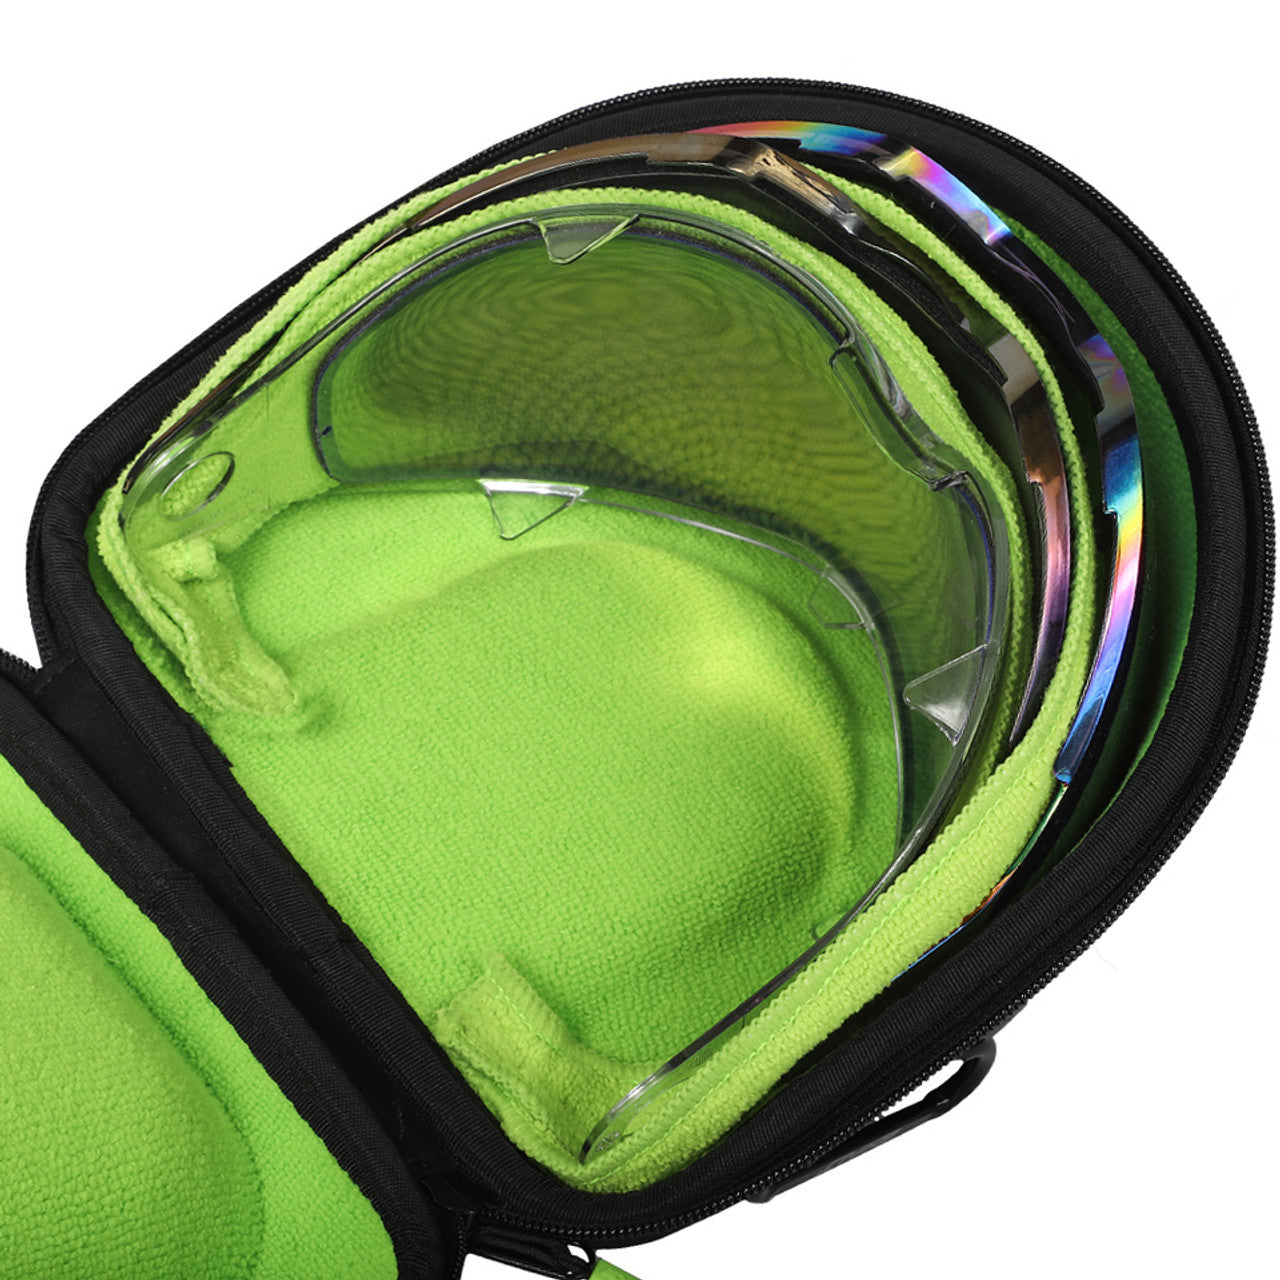 the V3 lens case has the same metal alloy internal structure as the V3 goggle case to resist crushing and deformation.